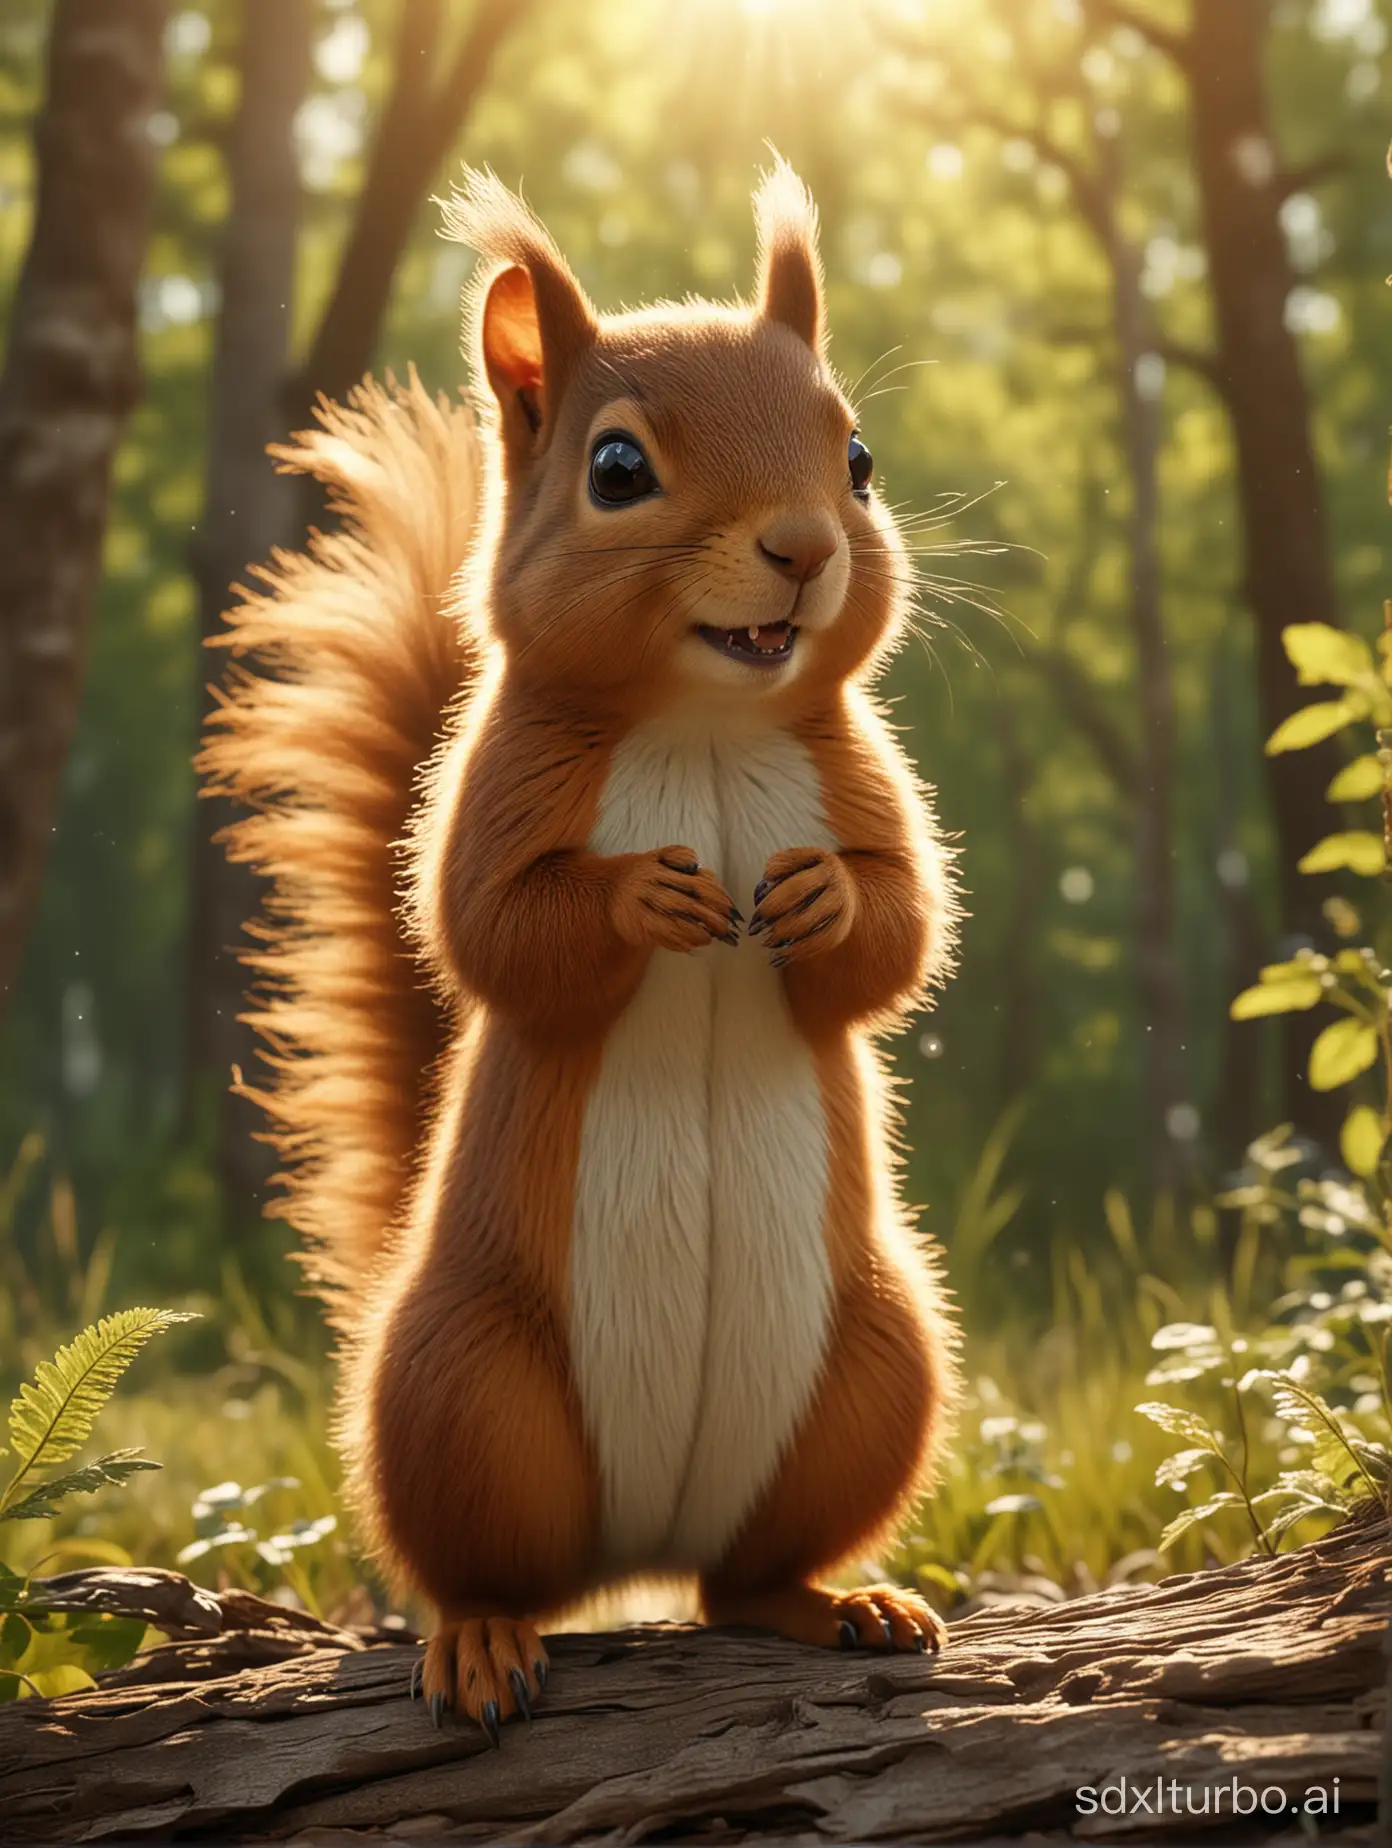 Sad-Squirrel-in-Sunlit-Forest-3D-Rendering-with-Cinematic-Effects